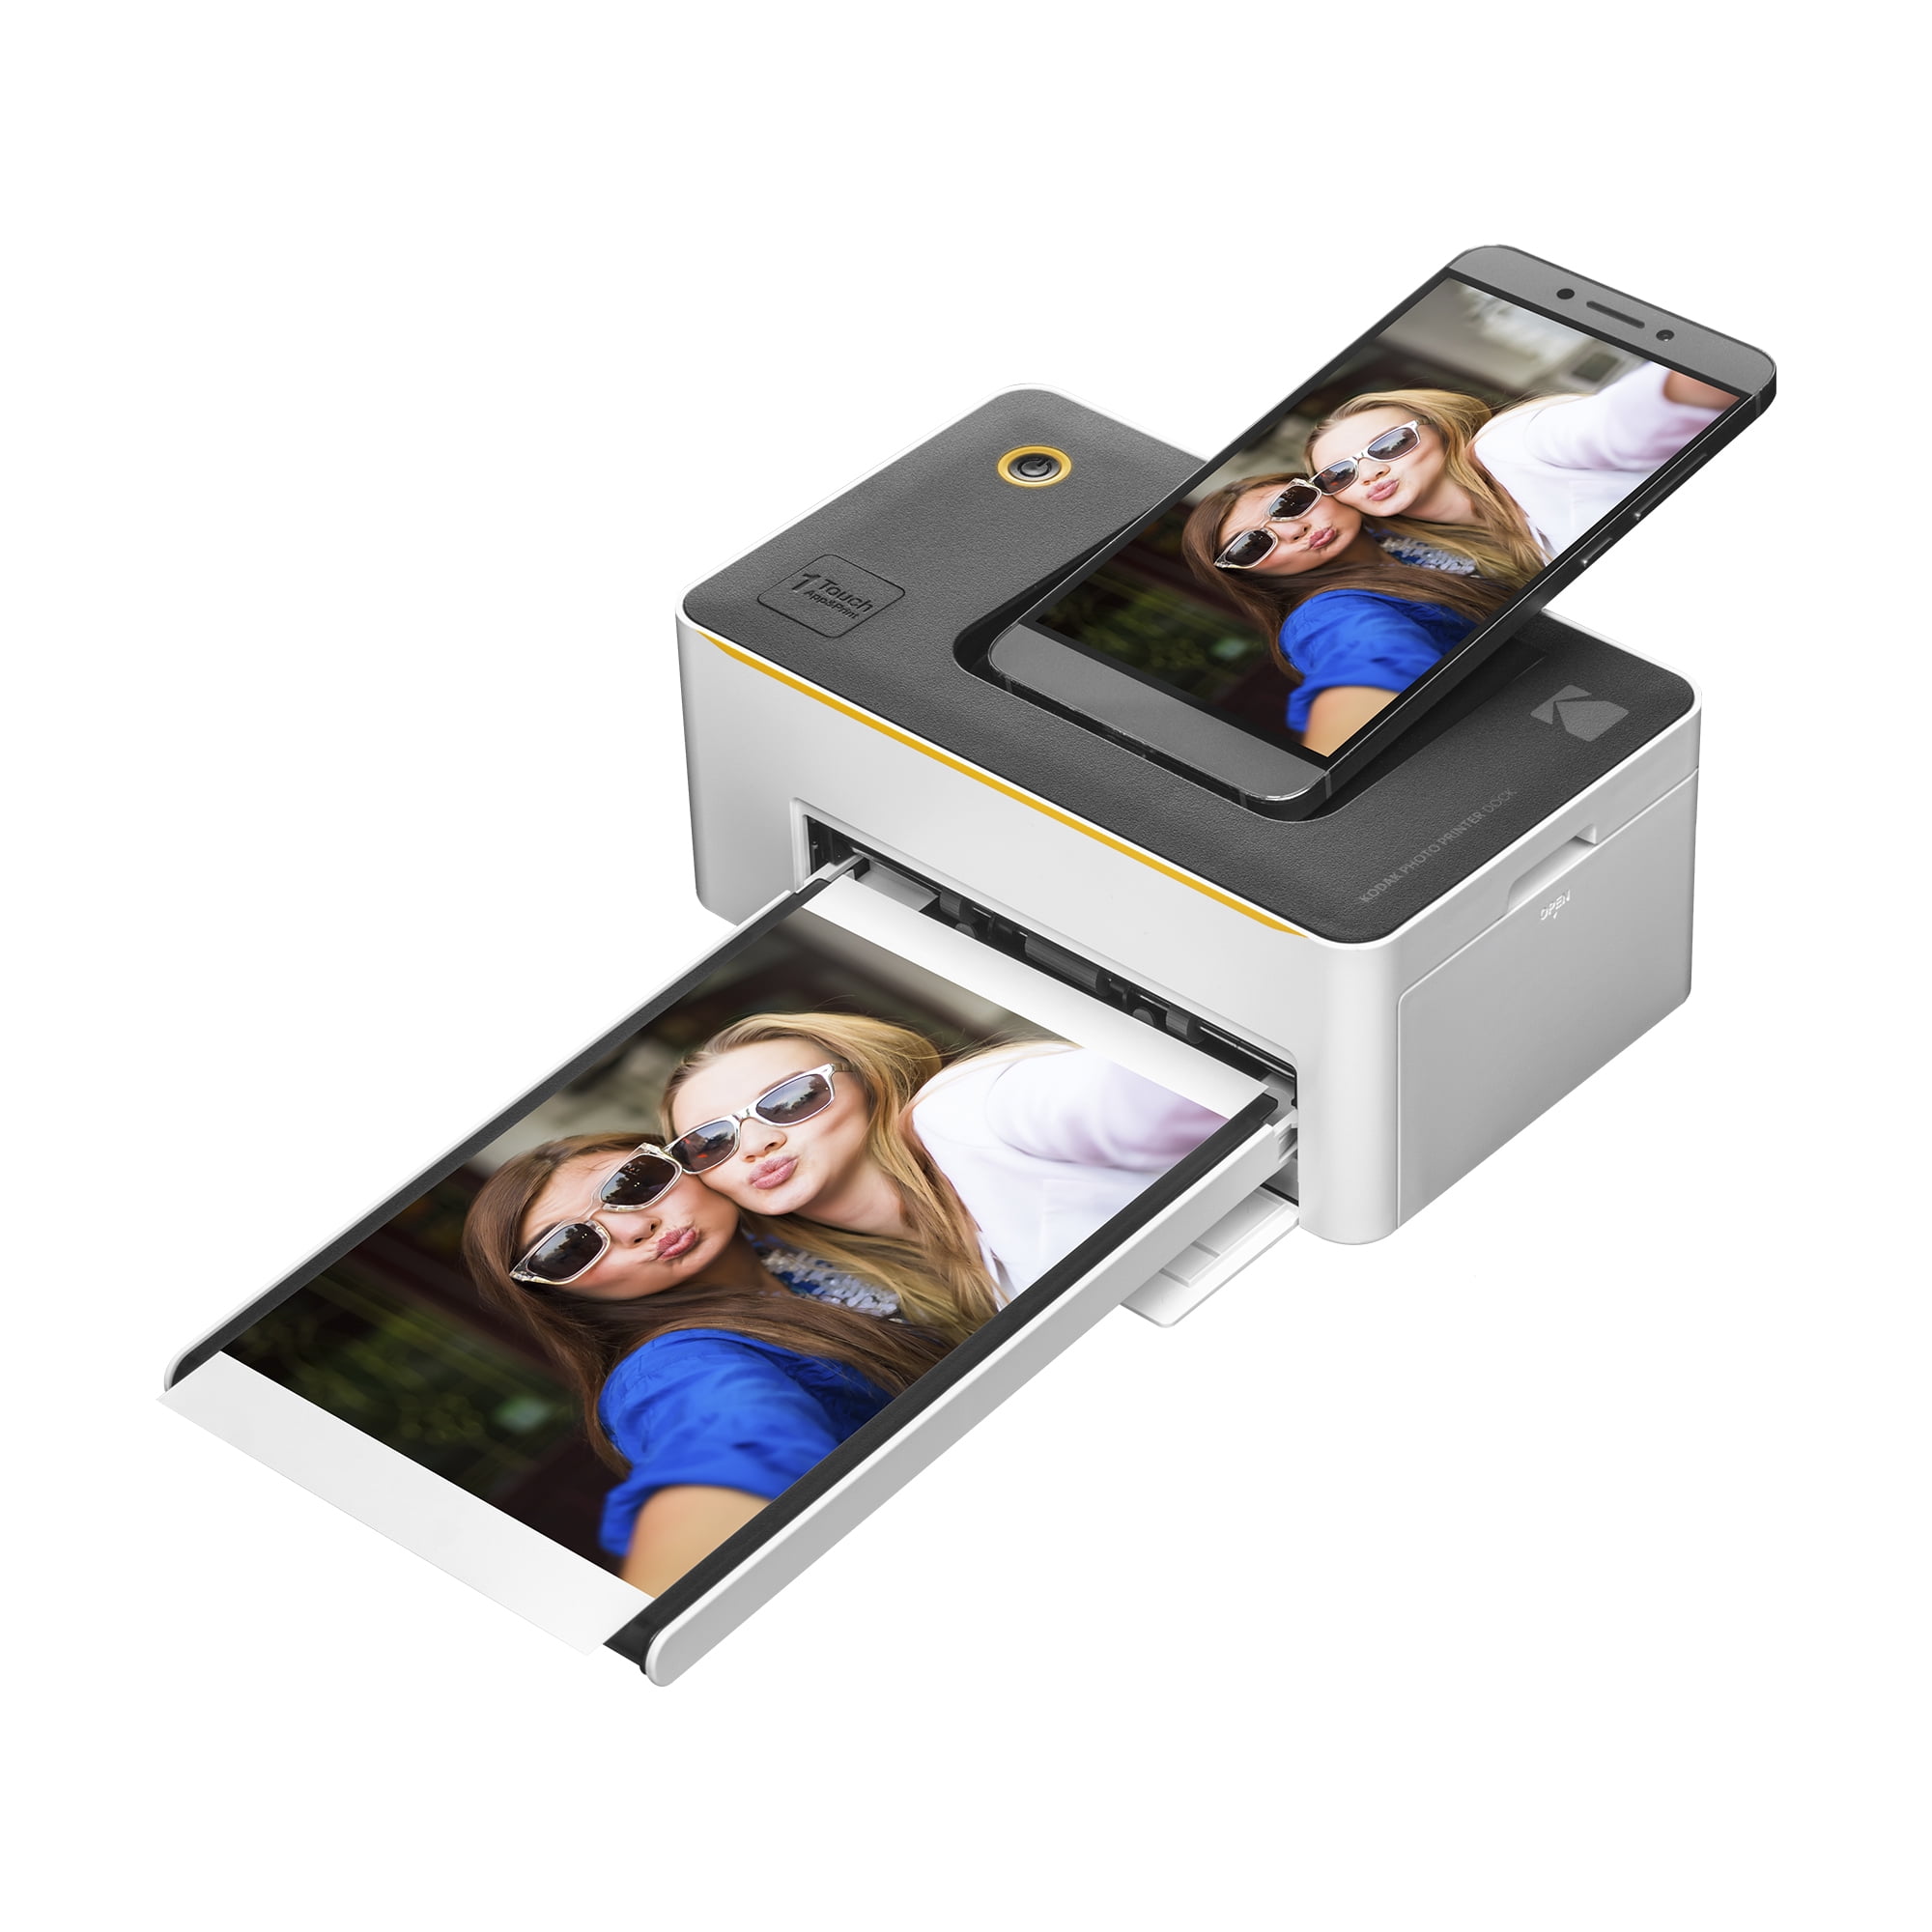 Stillehavsøer skære Andet Kodak Dock Premium 4x6” Portable Instant Photo Printer, Bluetooth Edition |  Full Color Photos, 4Pass & Lamination Process | Compatible with iOS,  Android, and Bluetooth Devices (2021 Edition) - Walmart.com